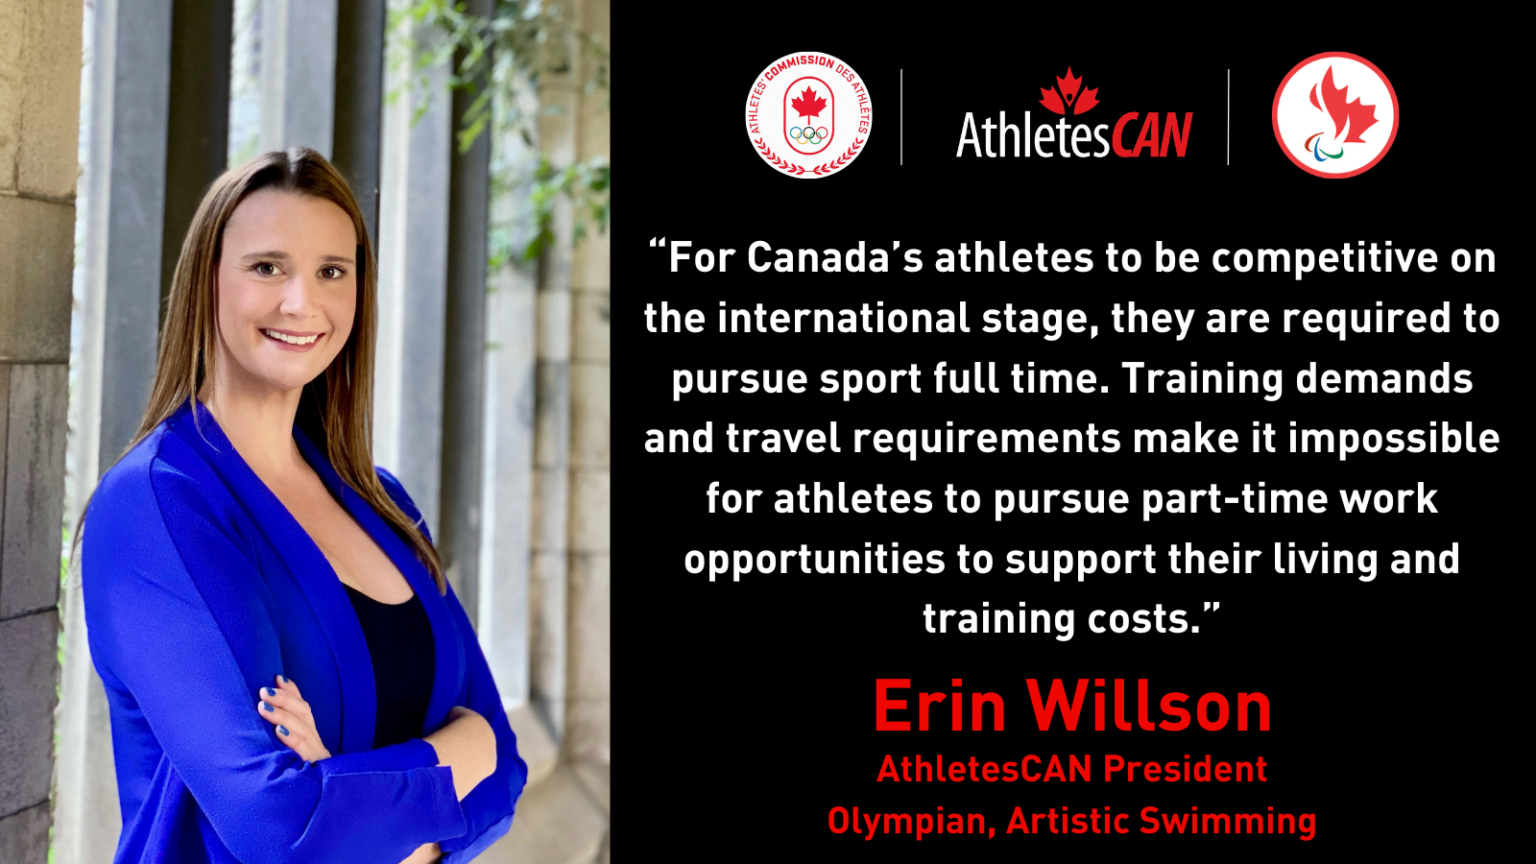 “For Canada’s athletes to be competitive on the international stage, they are required to pursue sport full time,” said AthletesCAN President and artistic swimming Olympian Erin Willson. “Training demands and travel requirements make it impossible for athletes to pursue part-time work opportunities to support their living and training costs.”